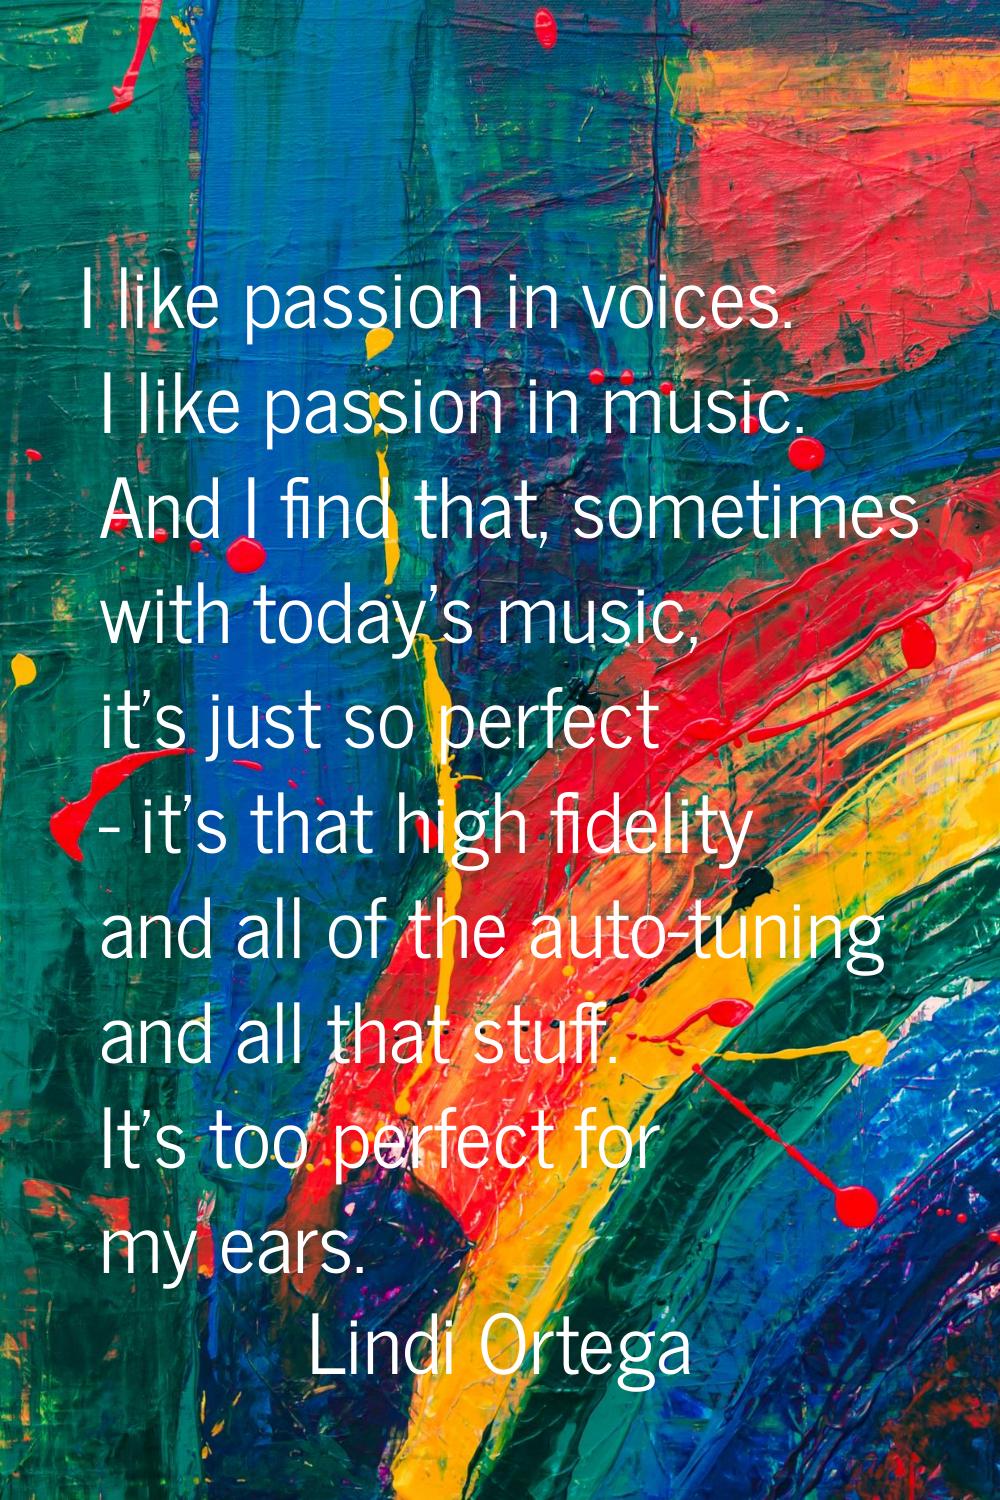 I like passion in voices. I like passion in music. And I find that, sometimes with today's music, i